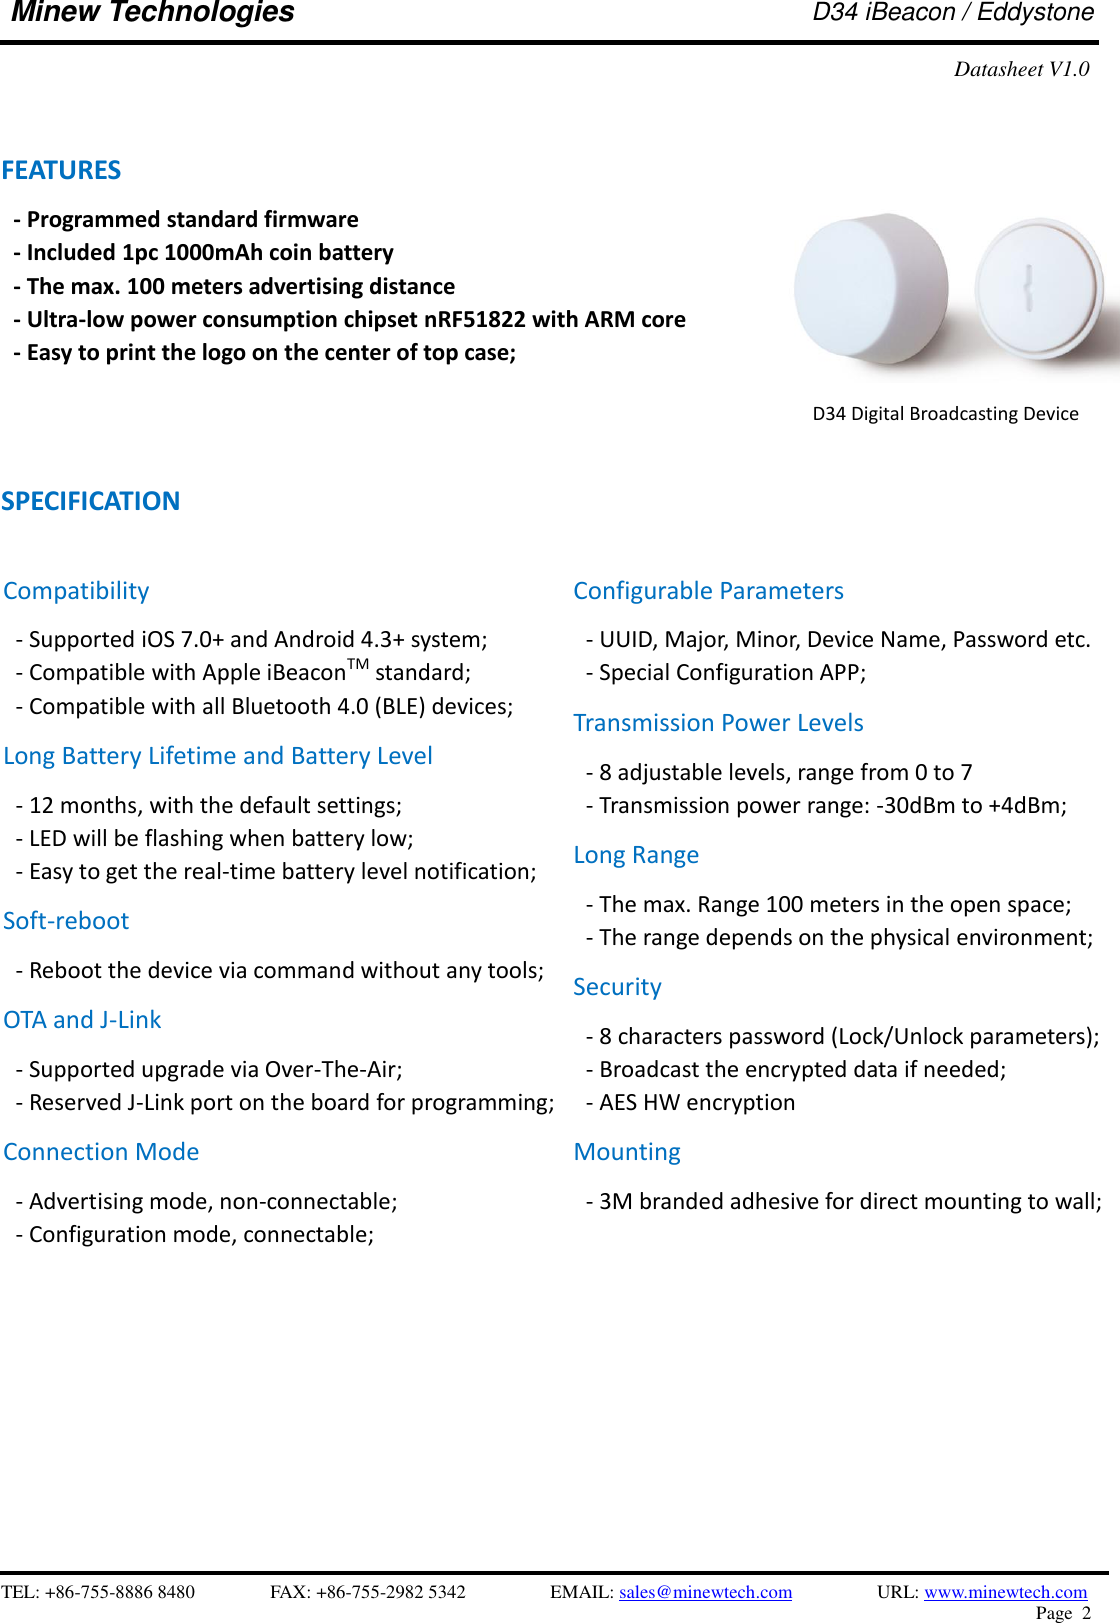    TEL: +86-755-8886 8480              FAX: +86-755-2982 5342              EMAIL: sales@minewtech.com           URL: www.minewtech.com Page  2  Minew Technologies D34 iBeacon / Eddystone Datasheet V1.0  FEATURES   - Programmed standard firmware   - Included 1pc 1000mAh coin battery - The max. 100 meters advertising distance - Ultra-low power consumption chipset nRF51822 with ARM core - Easy to print the logo on the center of top case;    SPECIFICATION                                                   D34 Digital Broadcasting Device  Compatibility - Supported iOS 7.0+ and Android 4.3+ system; - Compatible with Apple iBeaconTM standard;   - Compatible with all Bluetooth 4.0 (BLE) devices; Long Battery Lifetime and Battery Level - 12 months, with the default settings; - LED will be flashing when battery low; - Easy to get the real-time battery level notification; Soft-reboot   - Reboot the device via command without any tools;   OTA and J-Link - Supported upgrade via Over-The-Air;   - Reserved J-Link port on the board for programming;   Connection Mode - Advertising mode, non-connectable;   - Configuration mode, connectable;   Configurable Parameters - UUID, Major, Minor, Device Name, Password etc. - Special Configuration APP; Transmission Power Levels - 8 adjustable levels, range from 0 to 7 - Transmission power range: -30dBm to +4dBm;   Long Range - The max. Range 100 meters in the open space;   - The range depends on the physical environment; Security - 8 characters password (Lock/Unlock parameters);   - Broadcast the encrypted data if needed; - AES HW encryption Mounting - 3M branded adhesive for direct mounting to wall;     